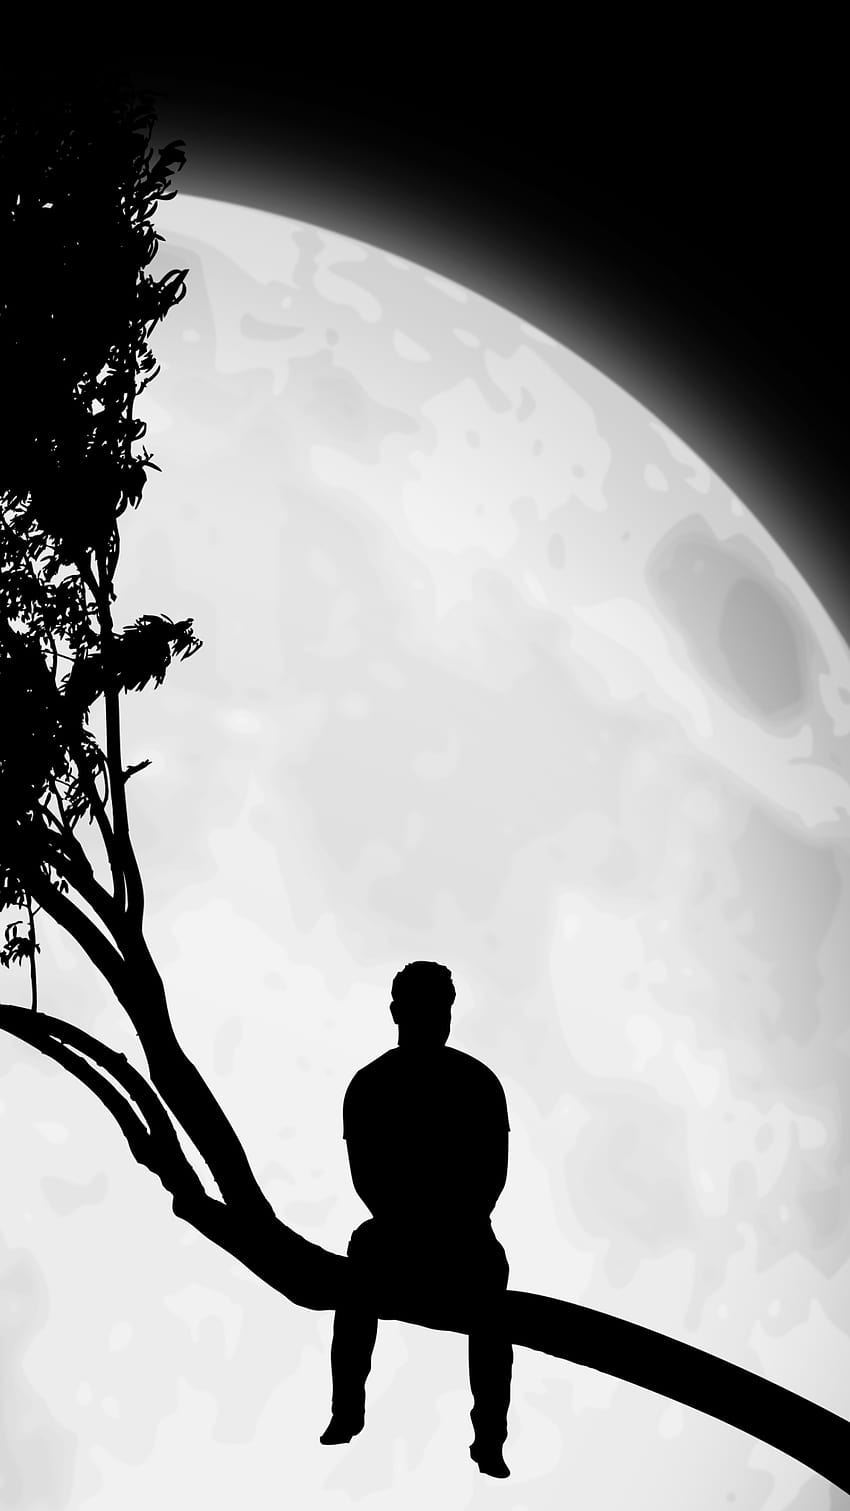 Alone with moon, moon and boy HD phone wallpaper